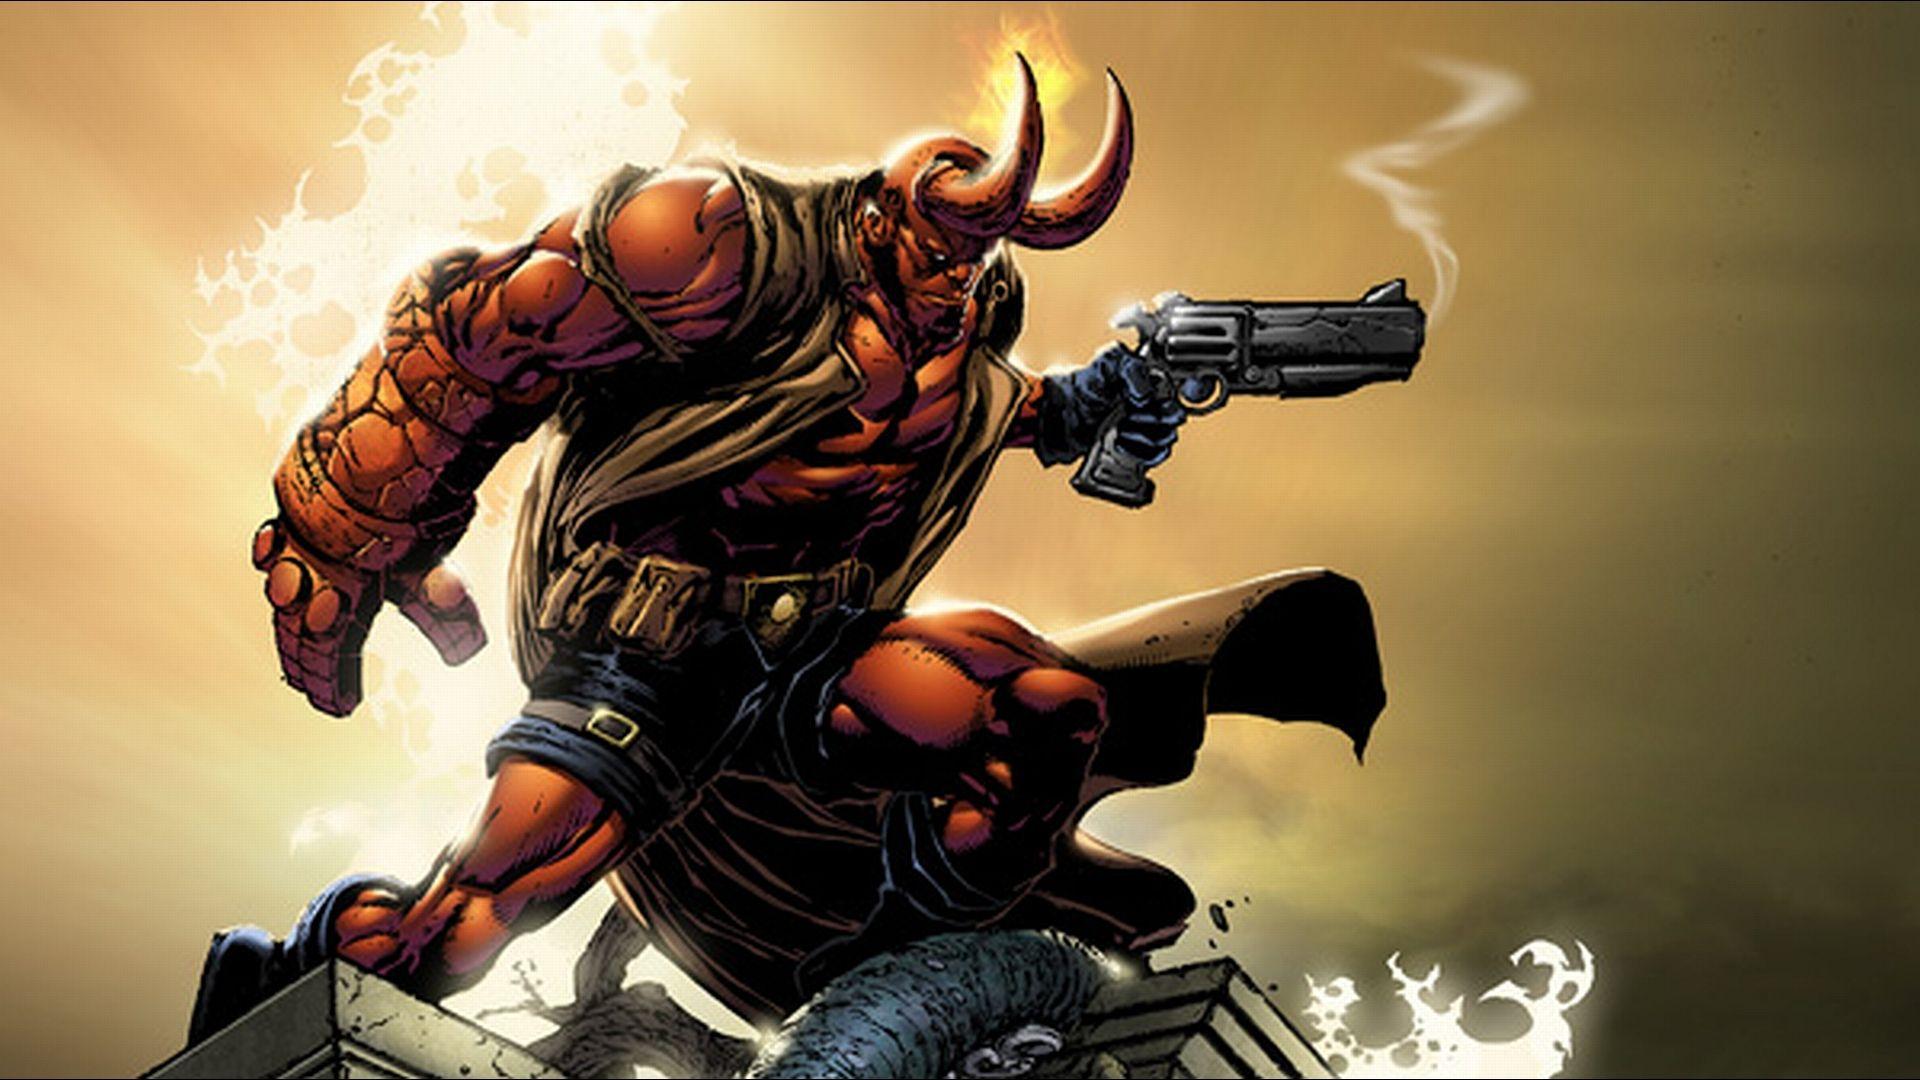 Wallpaper Blink of Hellboy Wallpaper HD for Android, Windows